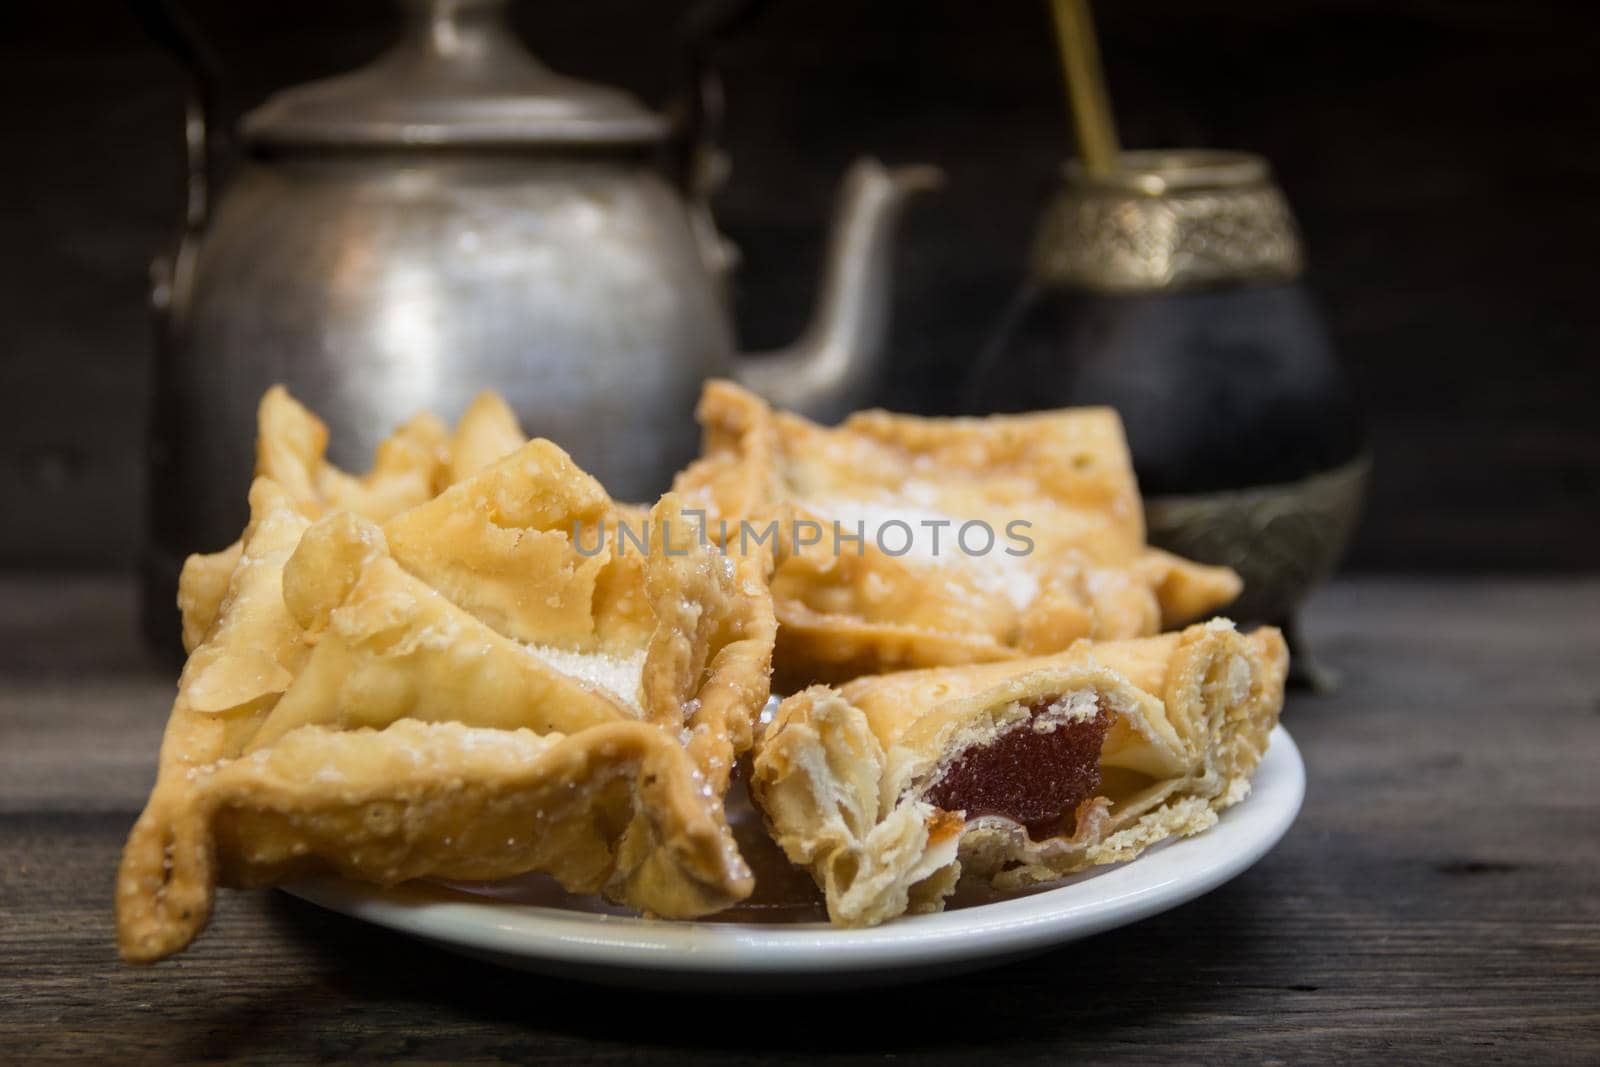 Plate of fried quince and sweet potato pastries with mate.Gastrnomia Argentina by GabrielaBertolini